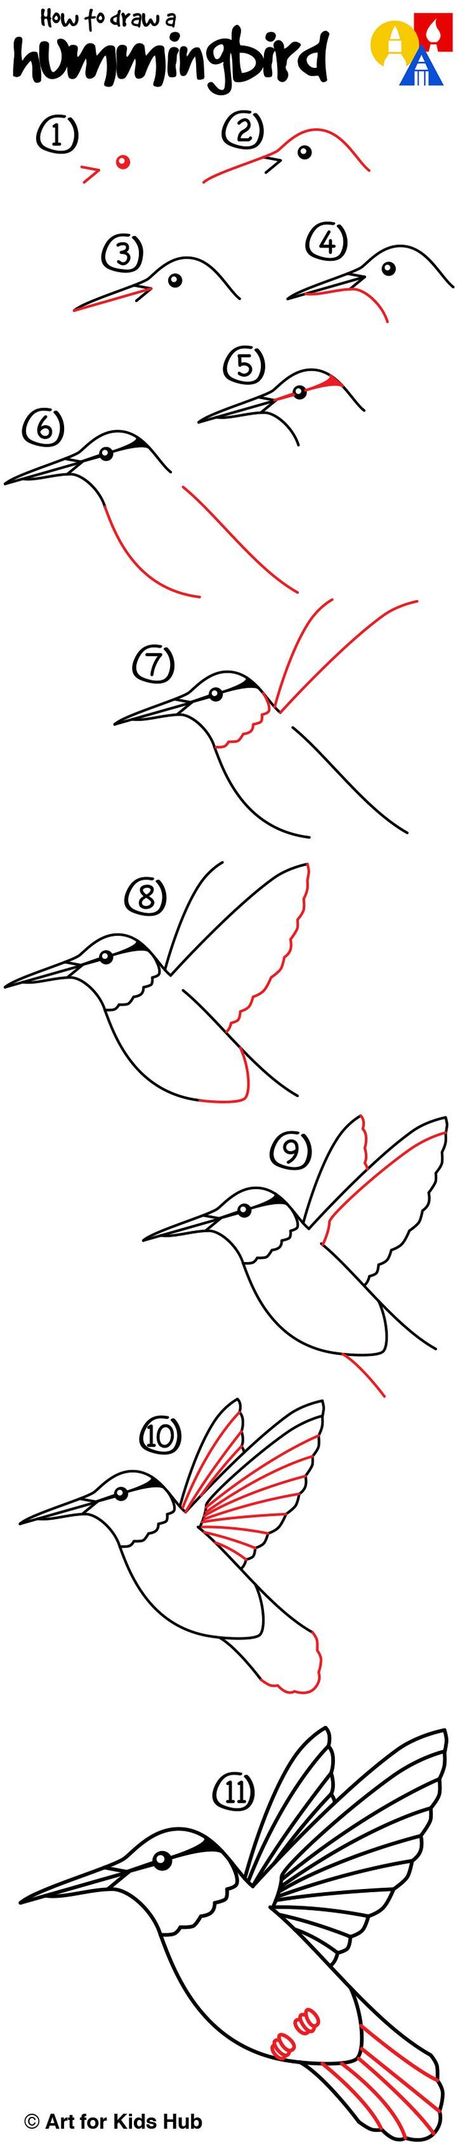 How To Draw A Hummingbird | Drawing and Painting Tutorials | Scoop.it